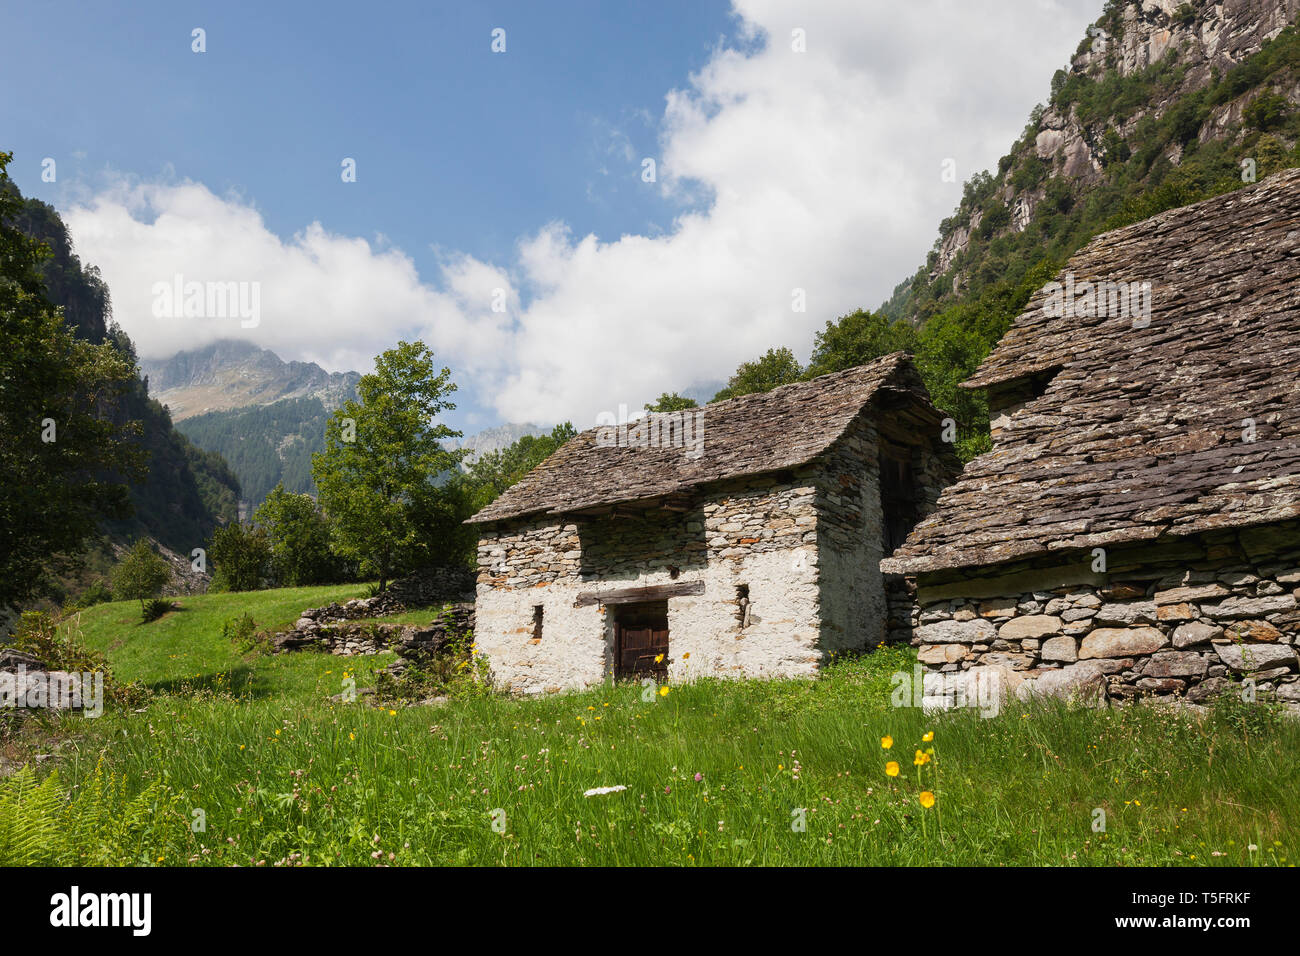 Switzerland, Ticino, Sonogno, typical historic stone house  and summer meadow Stock Photo